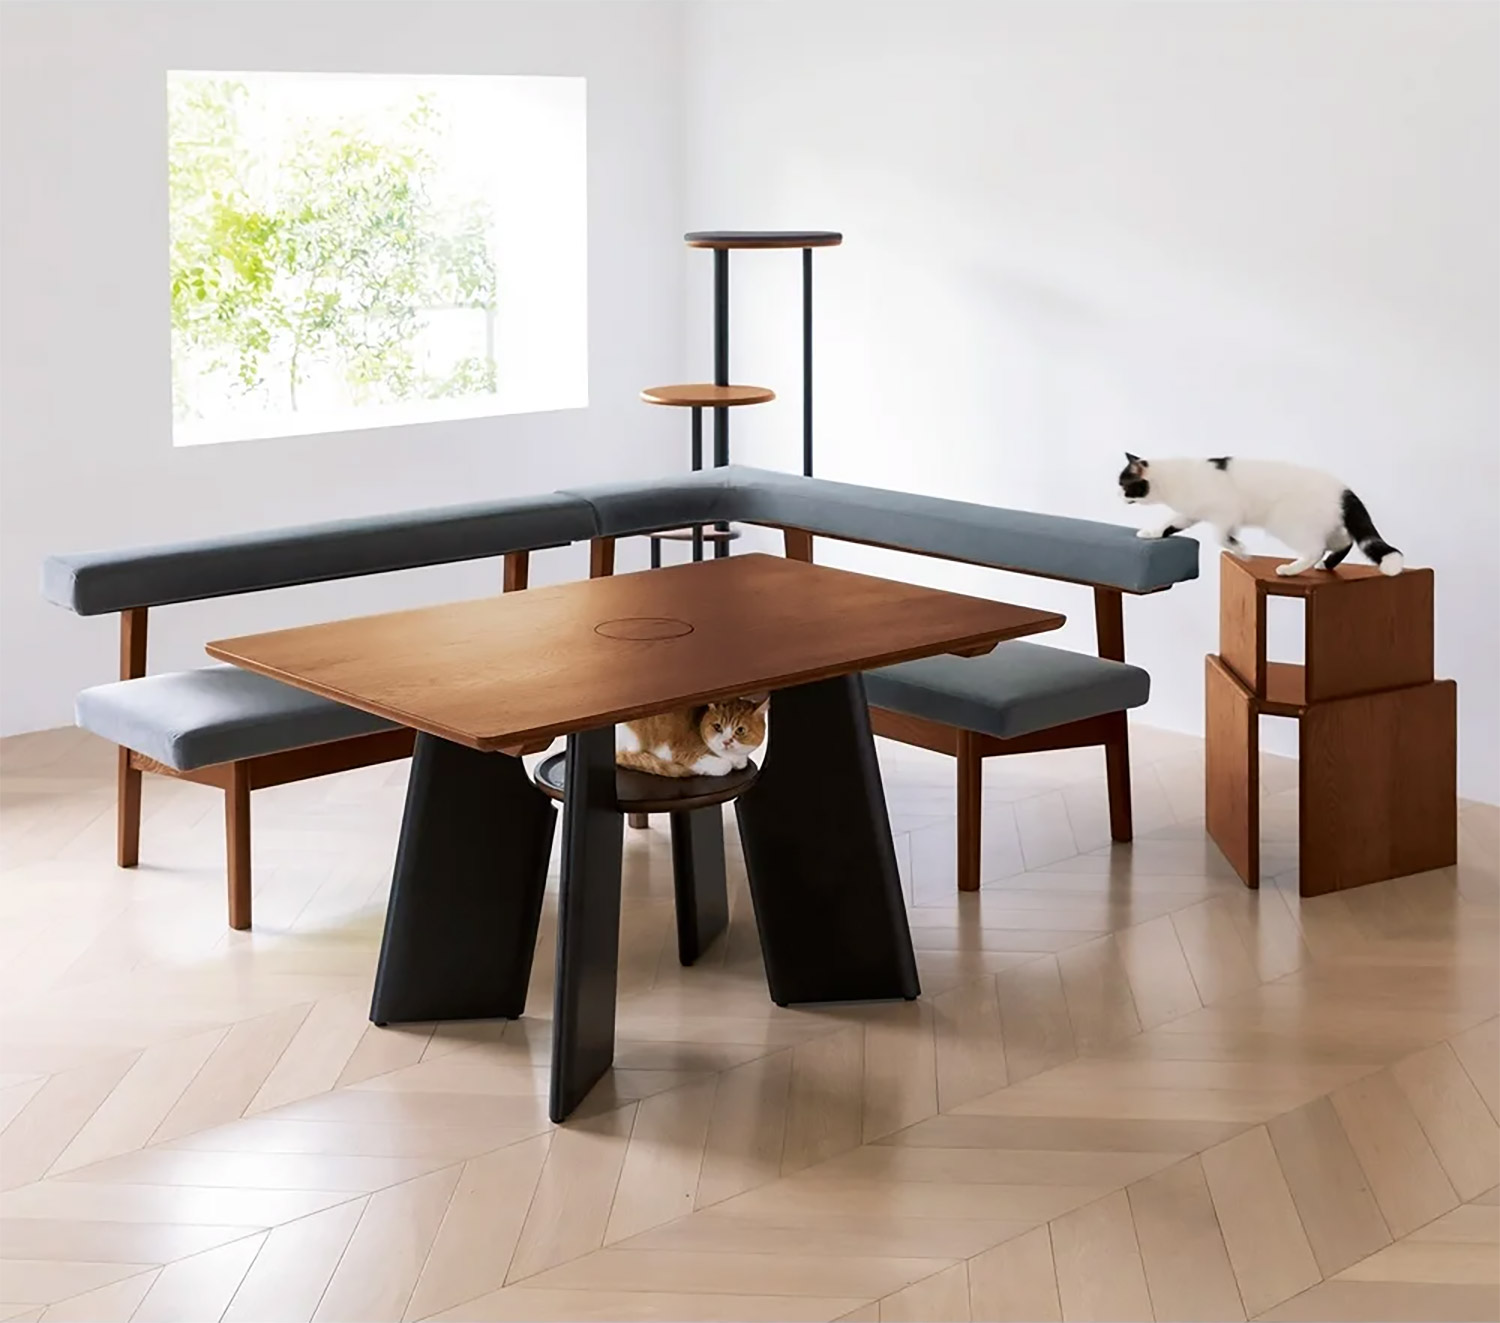 Cat Dining table with hole for your cat to peak through